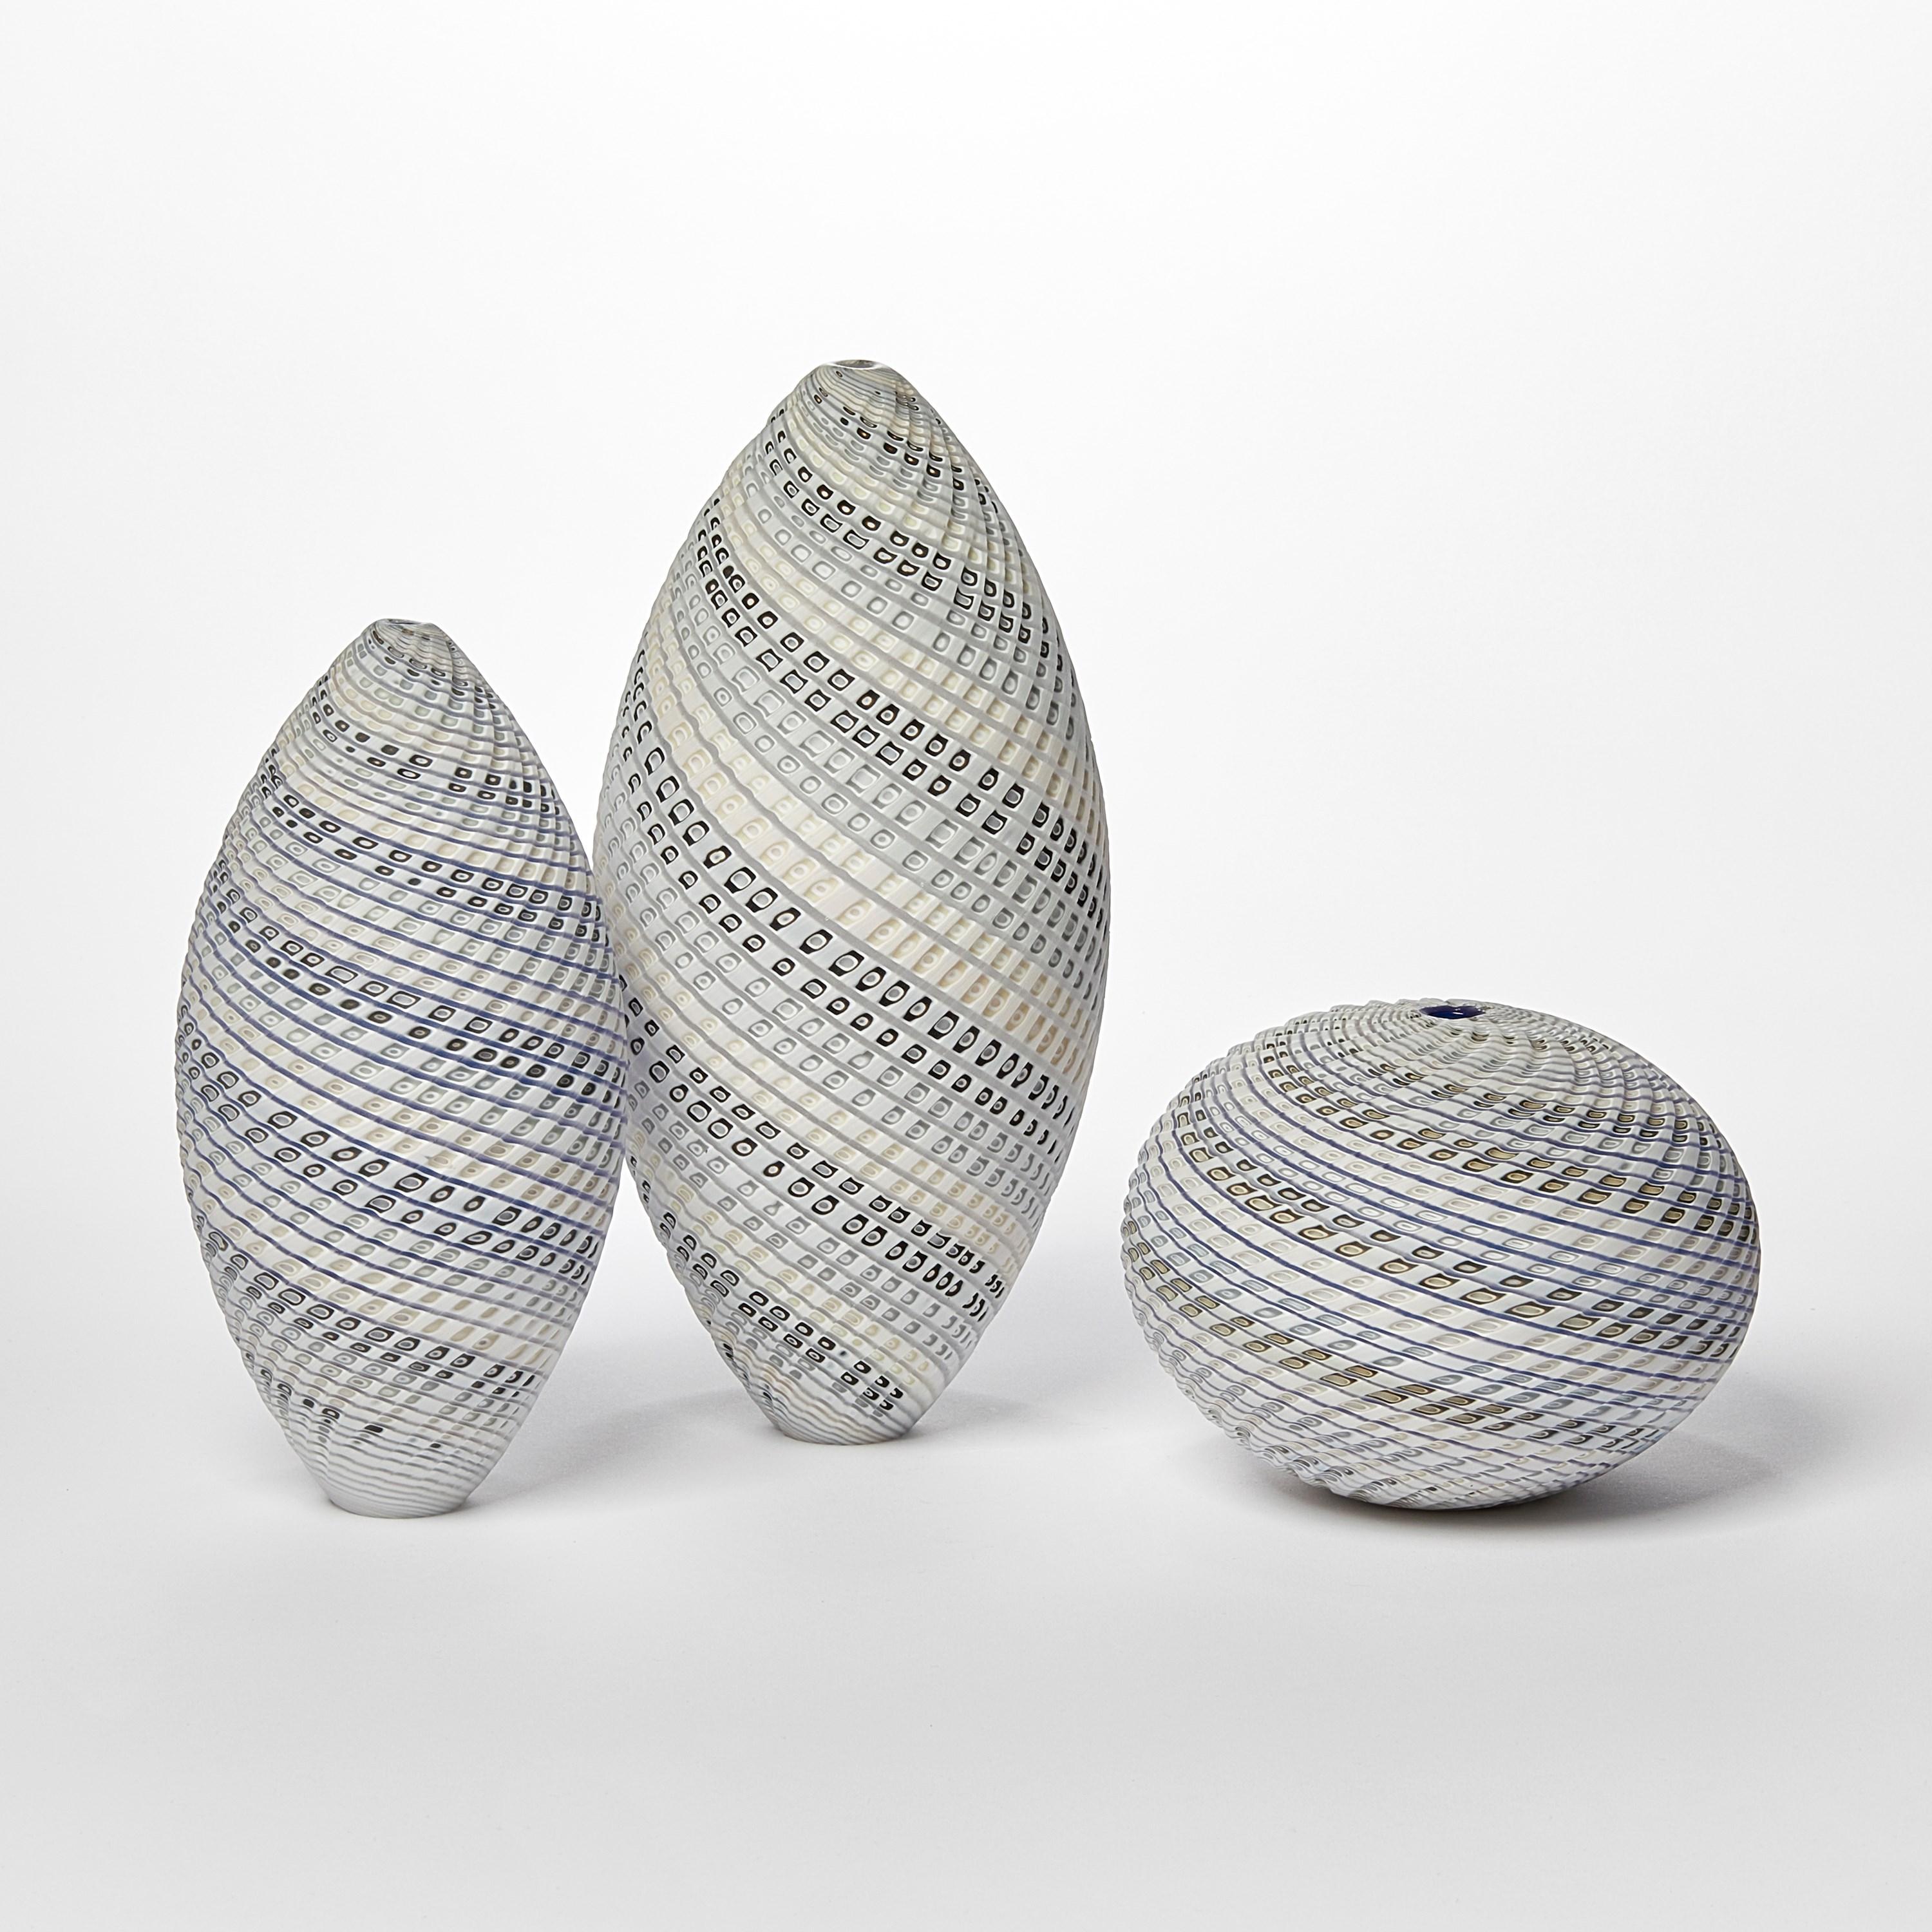 Hand-Crafted Woven Two Tone Ovoid (med), neutral pastel handblown glass vessel by Layne Rowe For Sale